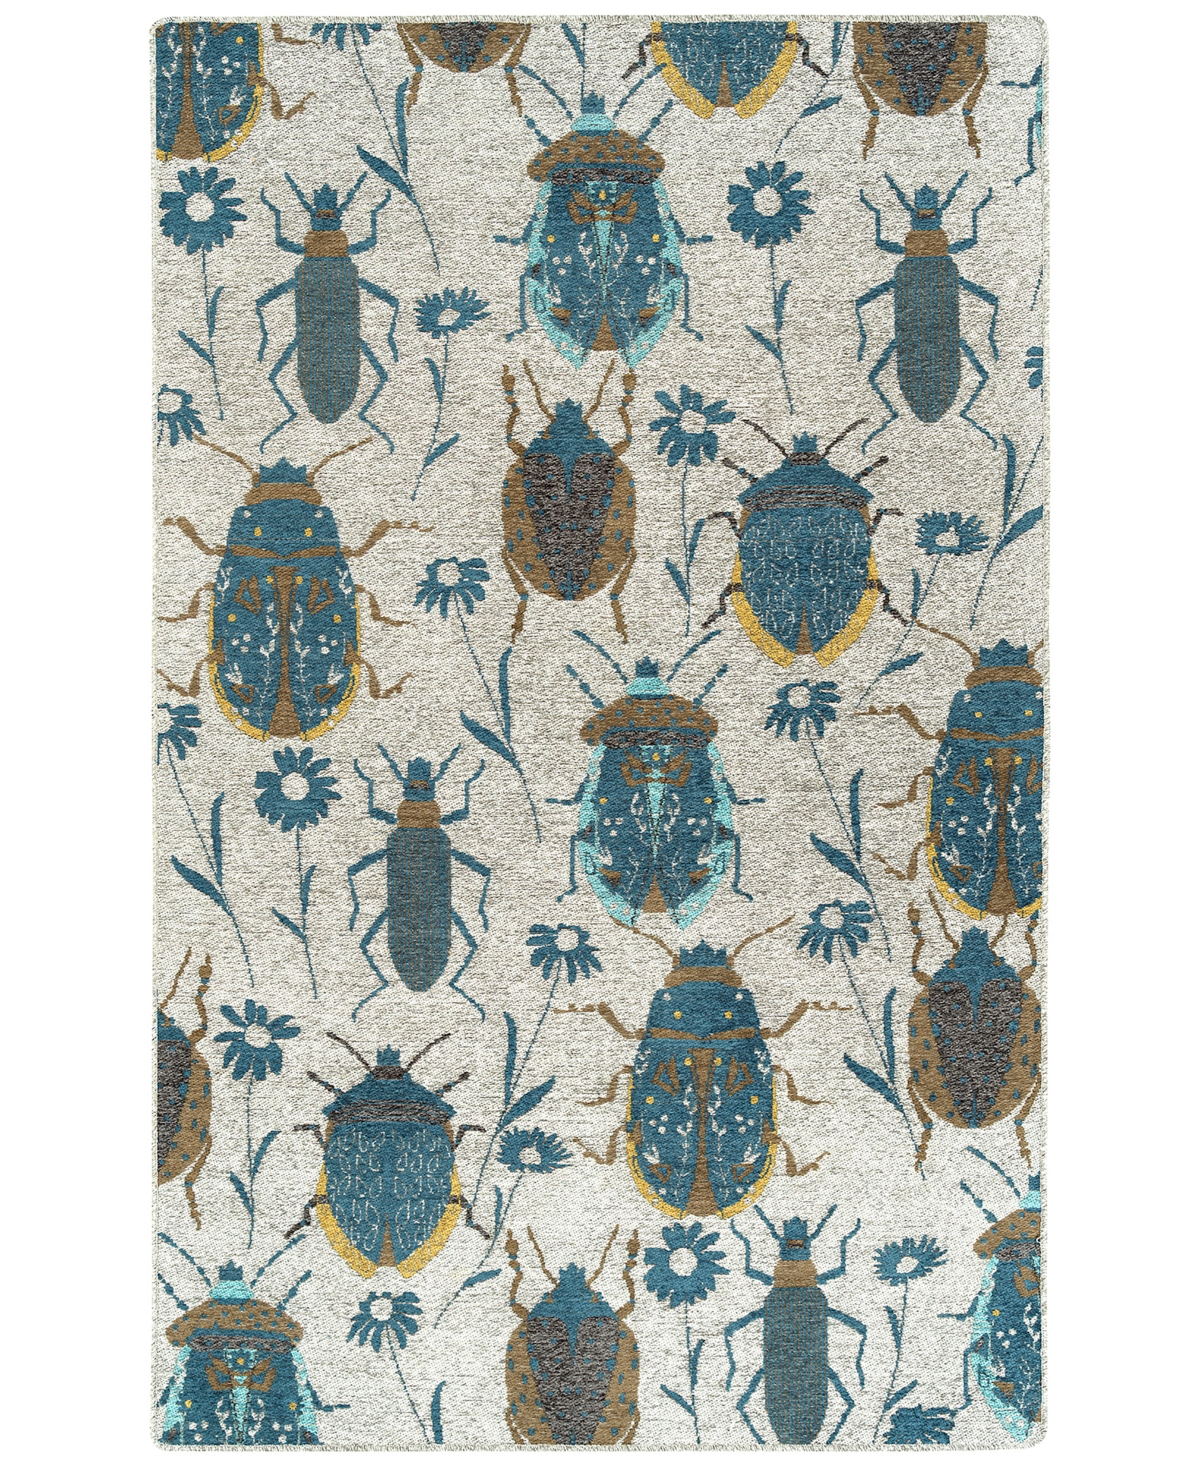 Hilary Farr Critter Comforts Hcc03-78 3' X 5' Area Rug In Blue